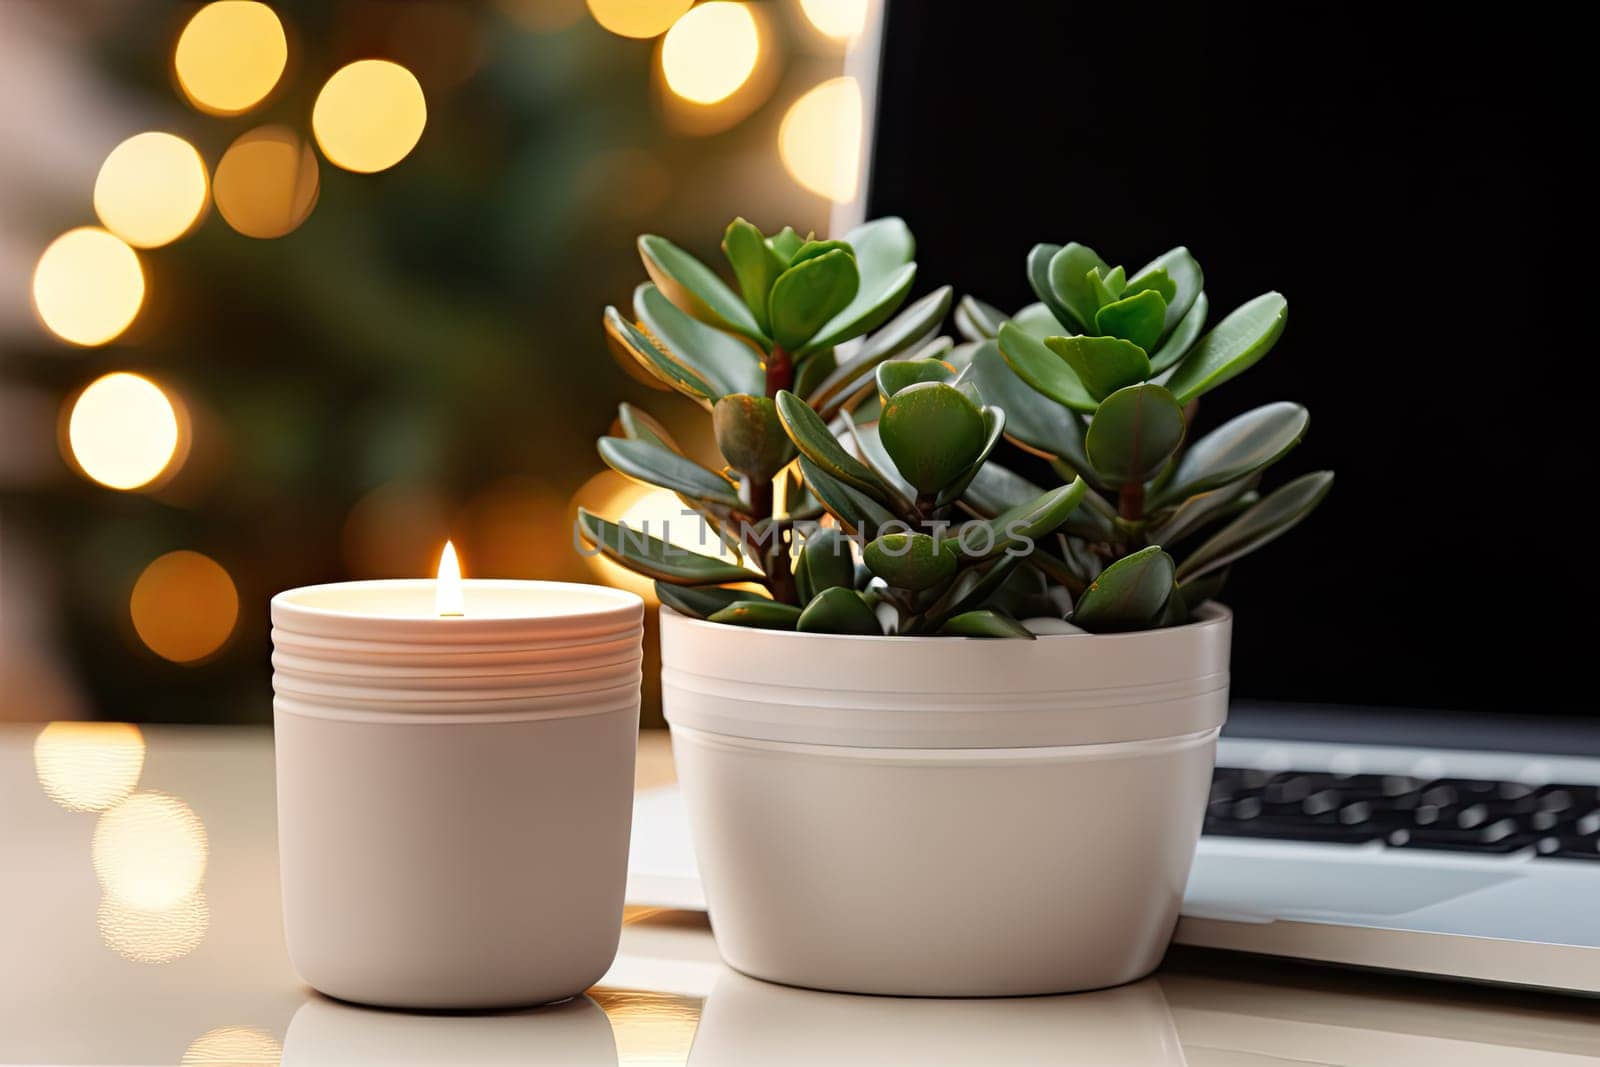 two potted plants sitting on a desk next to a laptop with a lit christmas tree in the back ground